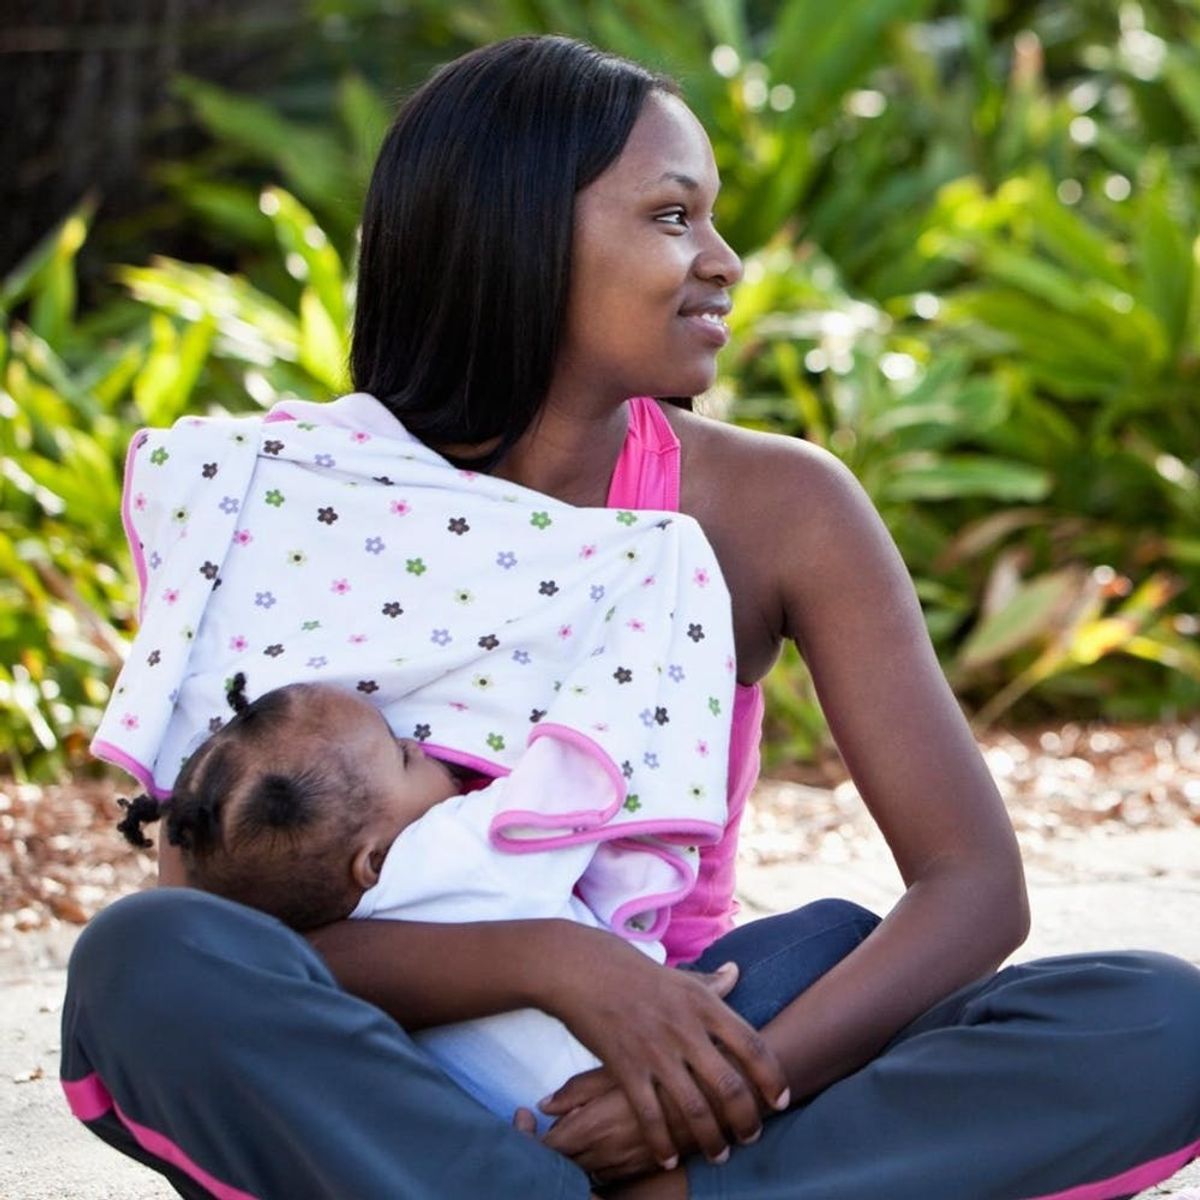 This Is the Simple Reason Why Millennials Breastfeed More Than Any Previous Generation